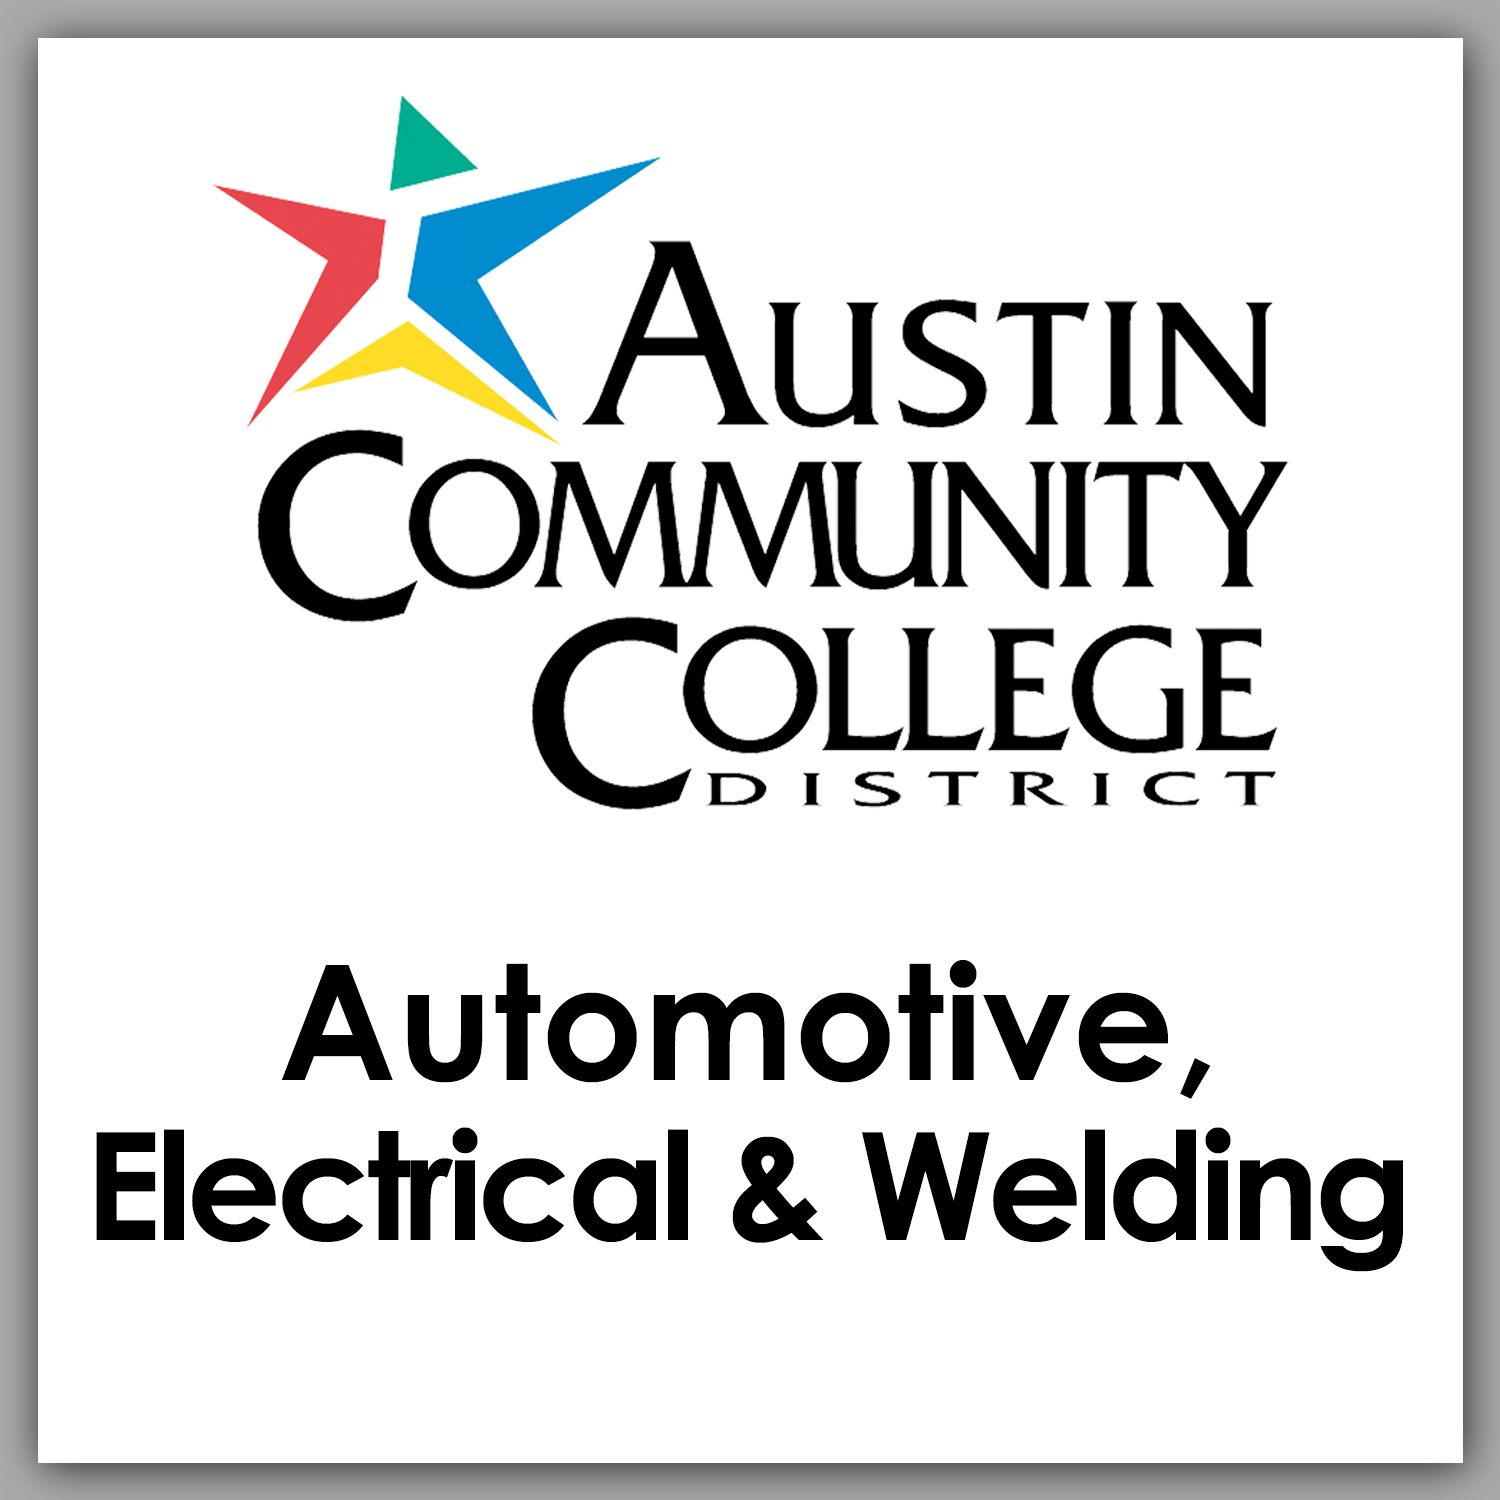 Austin Community College Automotive Electrical and welding